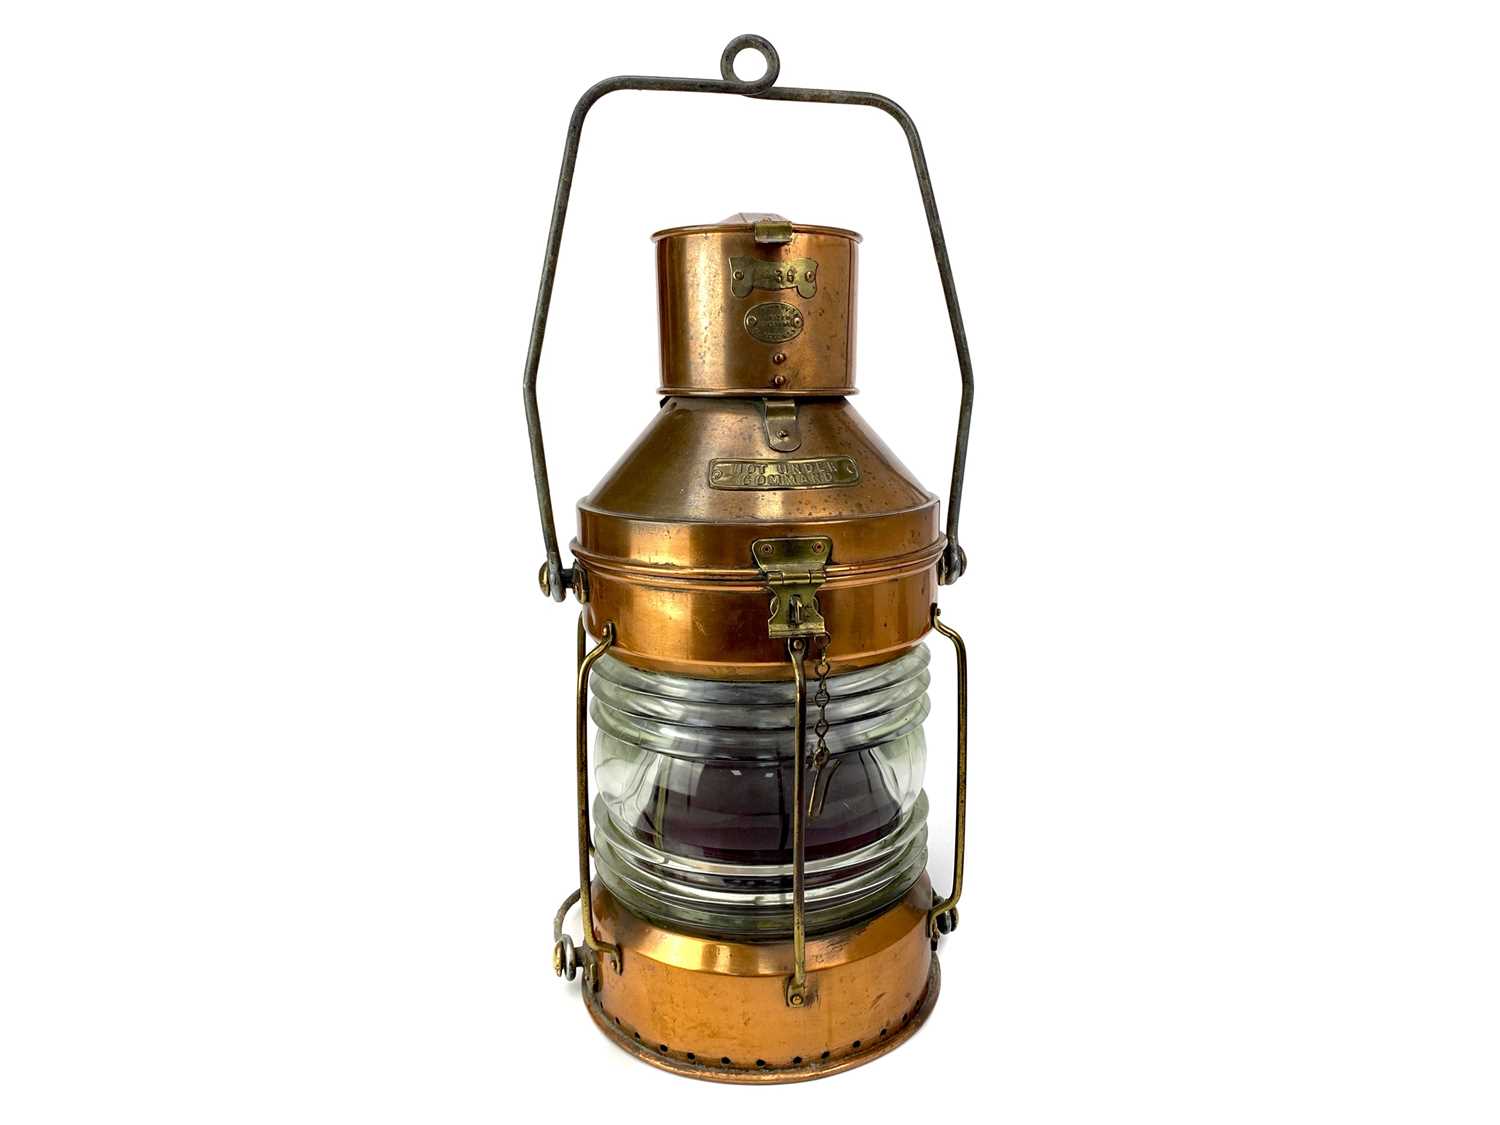 Lot 1602 - A SHIP'S COPPER 'NOT UNDER COMMAND' LAMP BY R.C. MURRAY